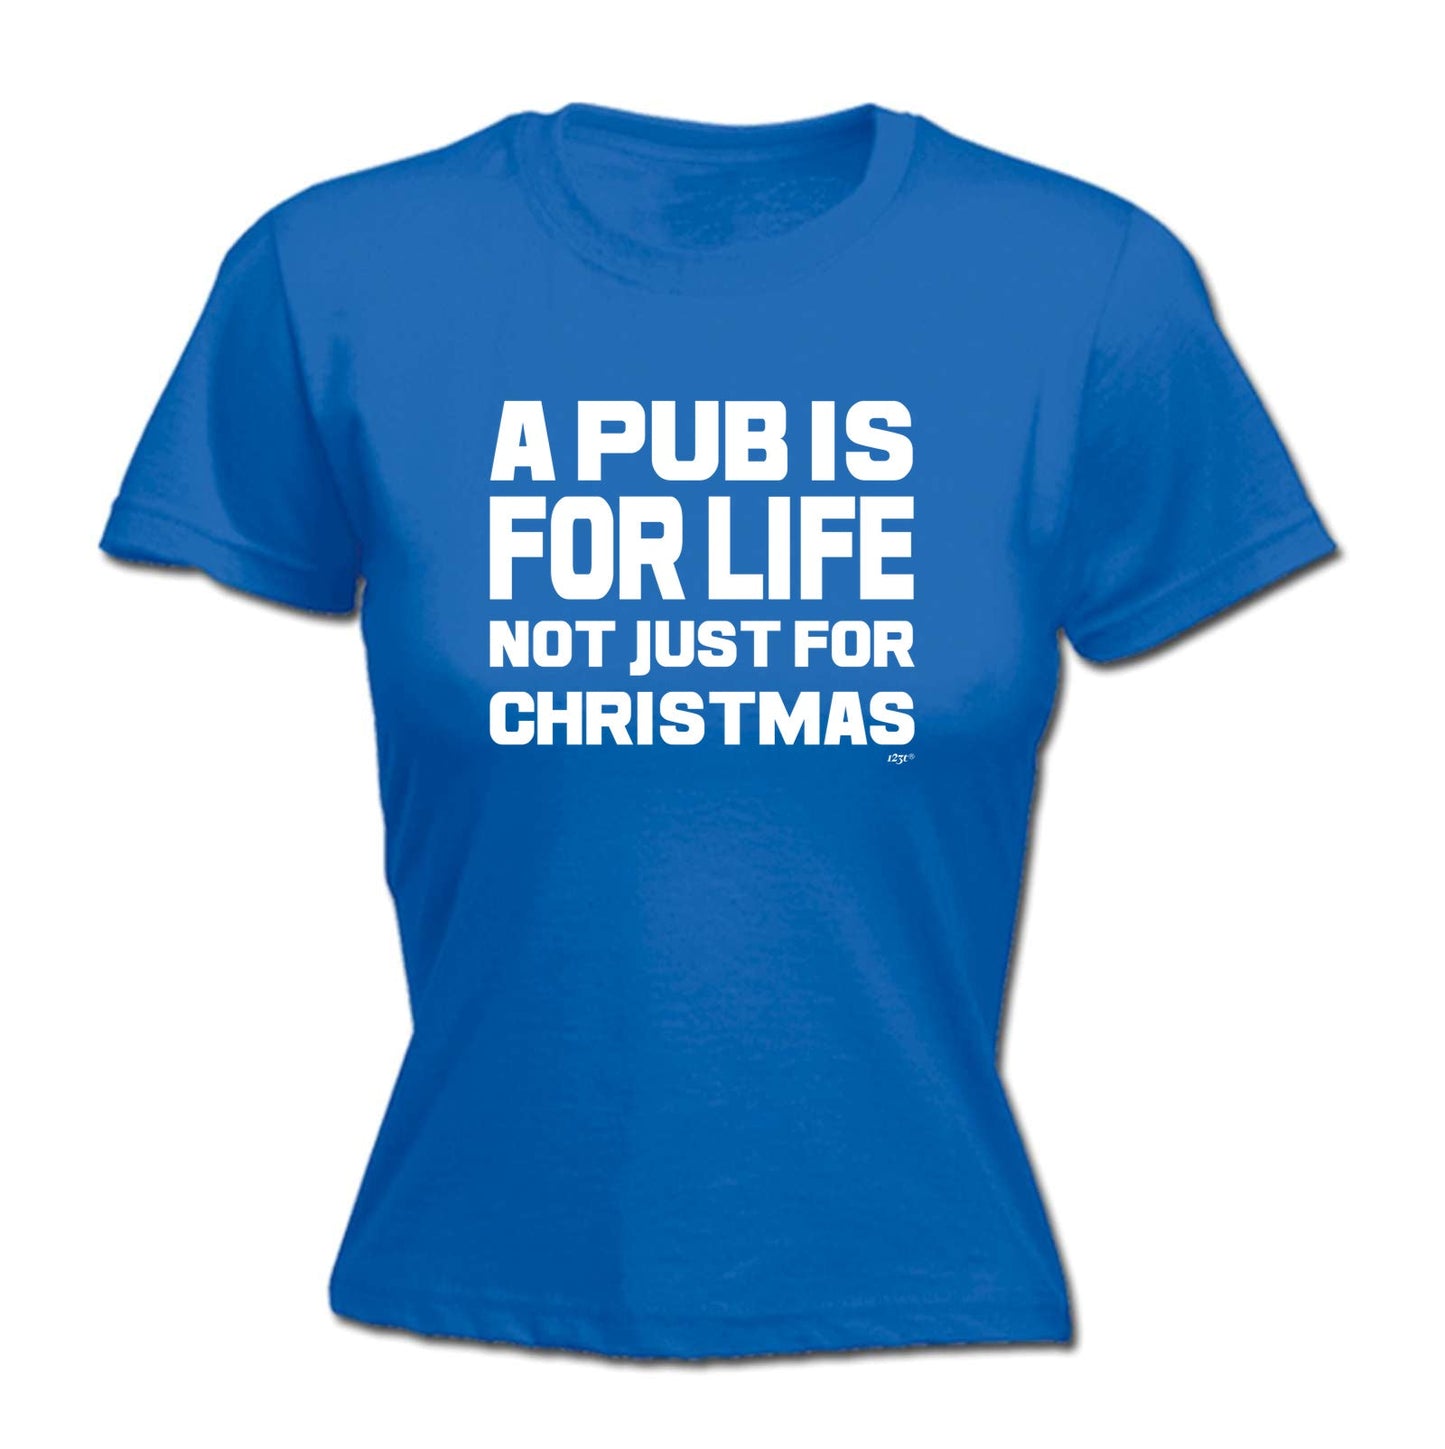 A Pub Is For Life Not Just For Christmas - Xmas Novelty Womens T-Shirt Tshirt